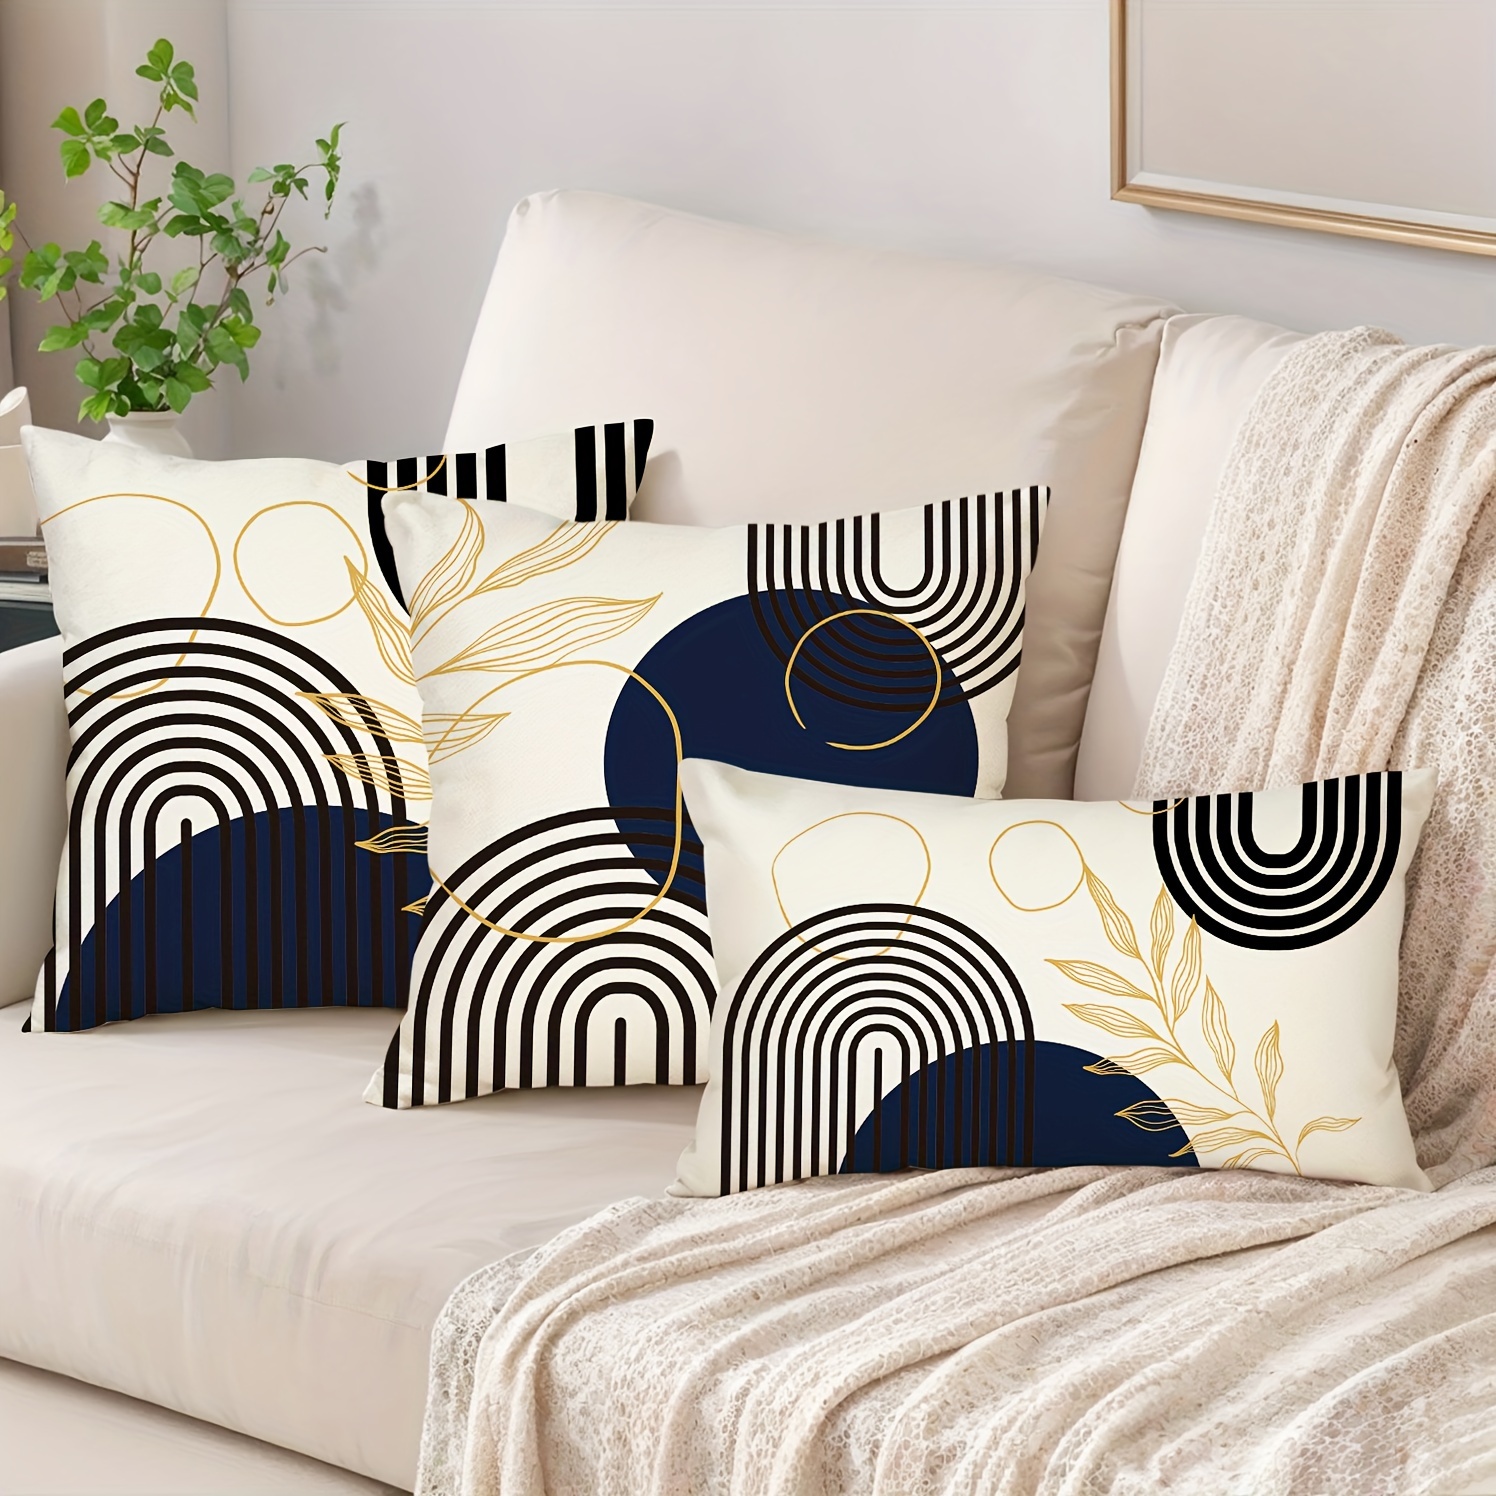 

Boho-chic 2pc Throw Pillow Covers - Abstract Geometric Design, Linen Blend, Zip Closure - Perfect For Couch, Sofa & Outdoor Decor - Farmhouse Style Home Accents (inserts Not Included)